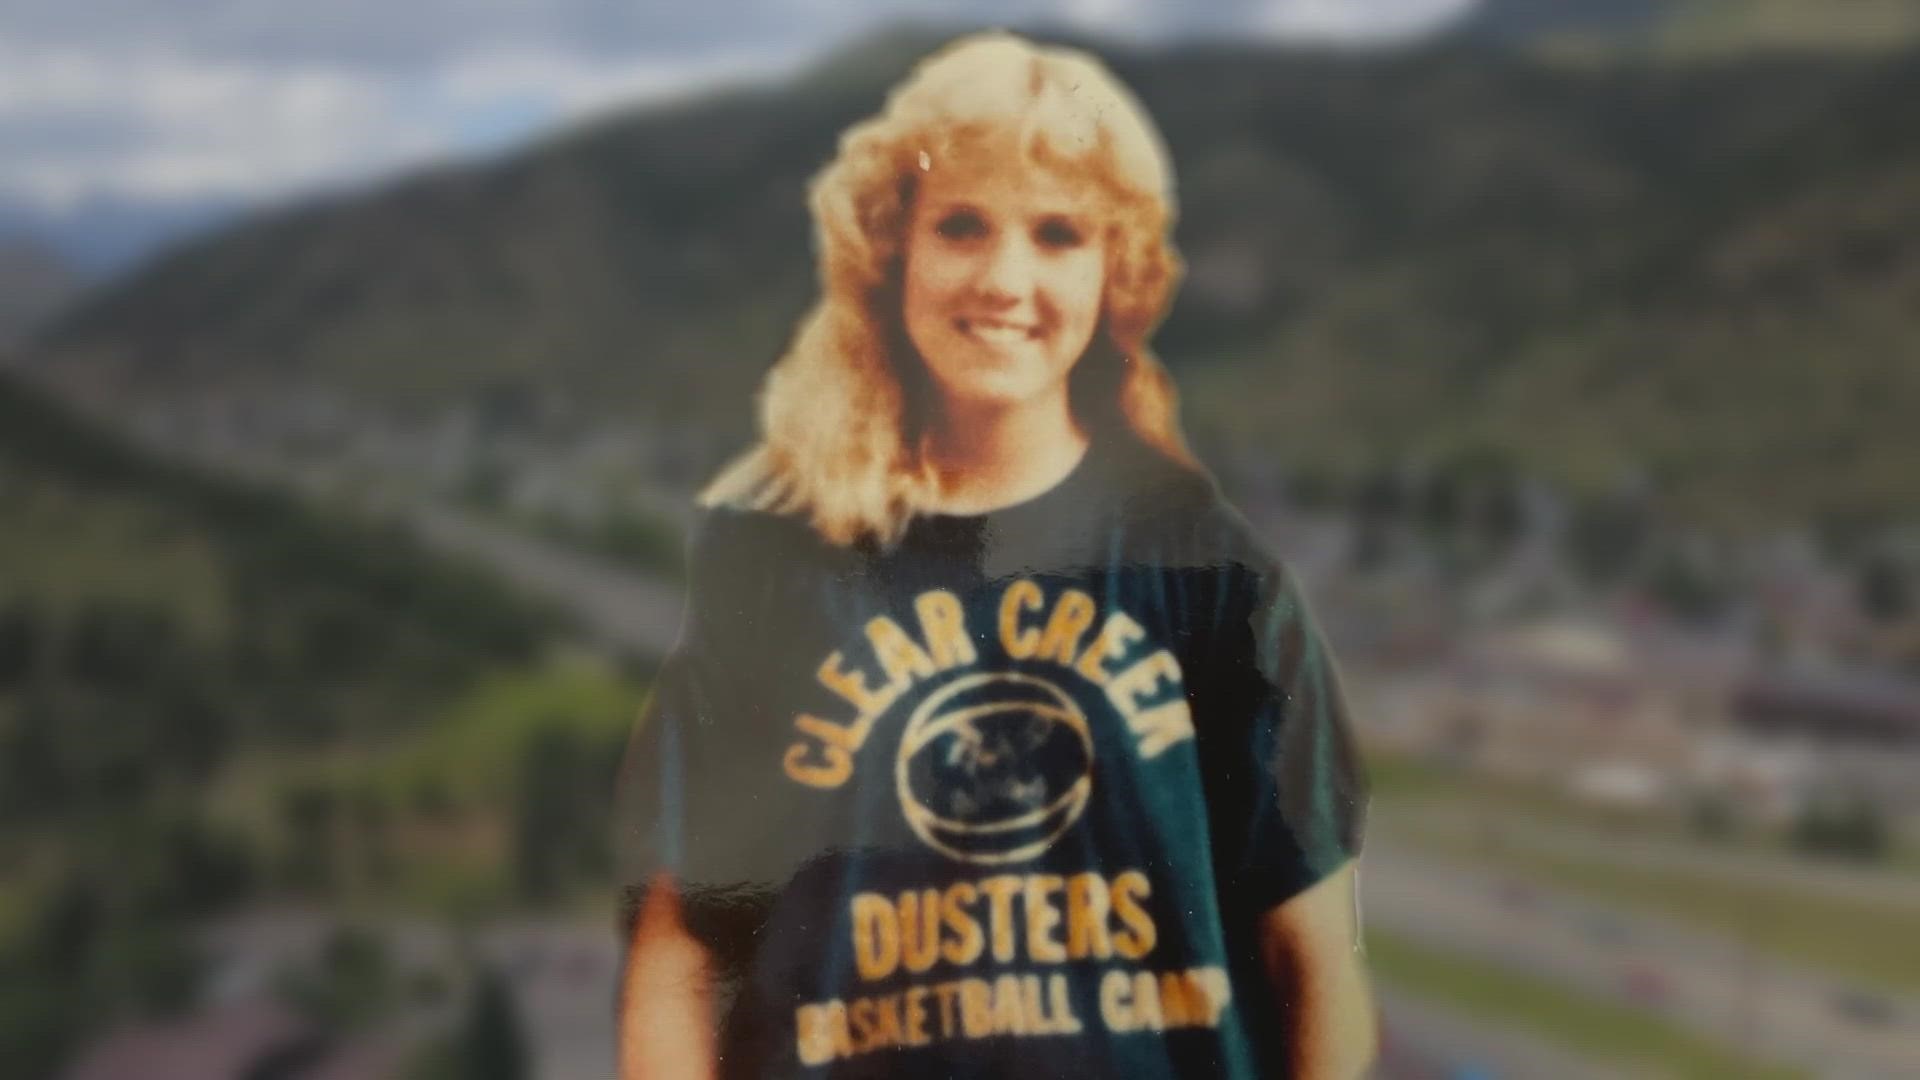 Beth Miller was last seen on Aug. 16, 1983. She never returned from a jog in the Idaho Springs area. Her family still hopes to find out what happened to her.